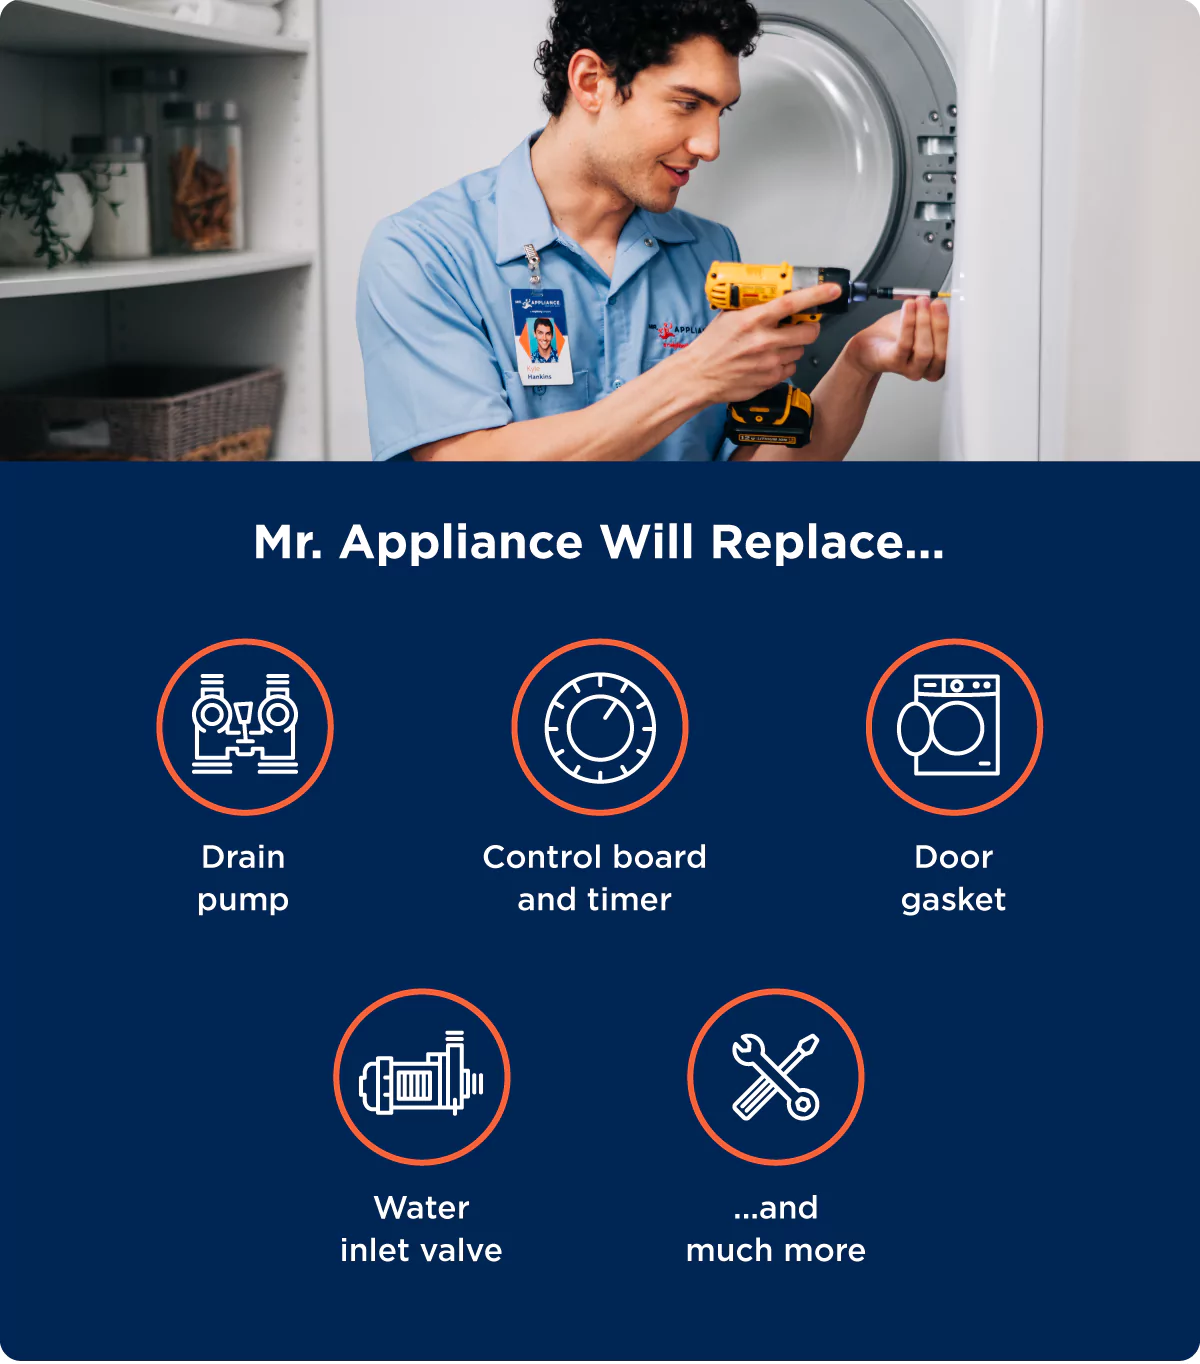 List of common parts Mr. Appliance replaces with visual icons: drain pump, control board and timer, door gasket, water inlet valve.